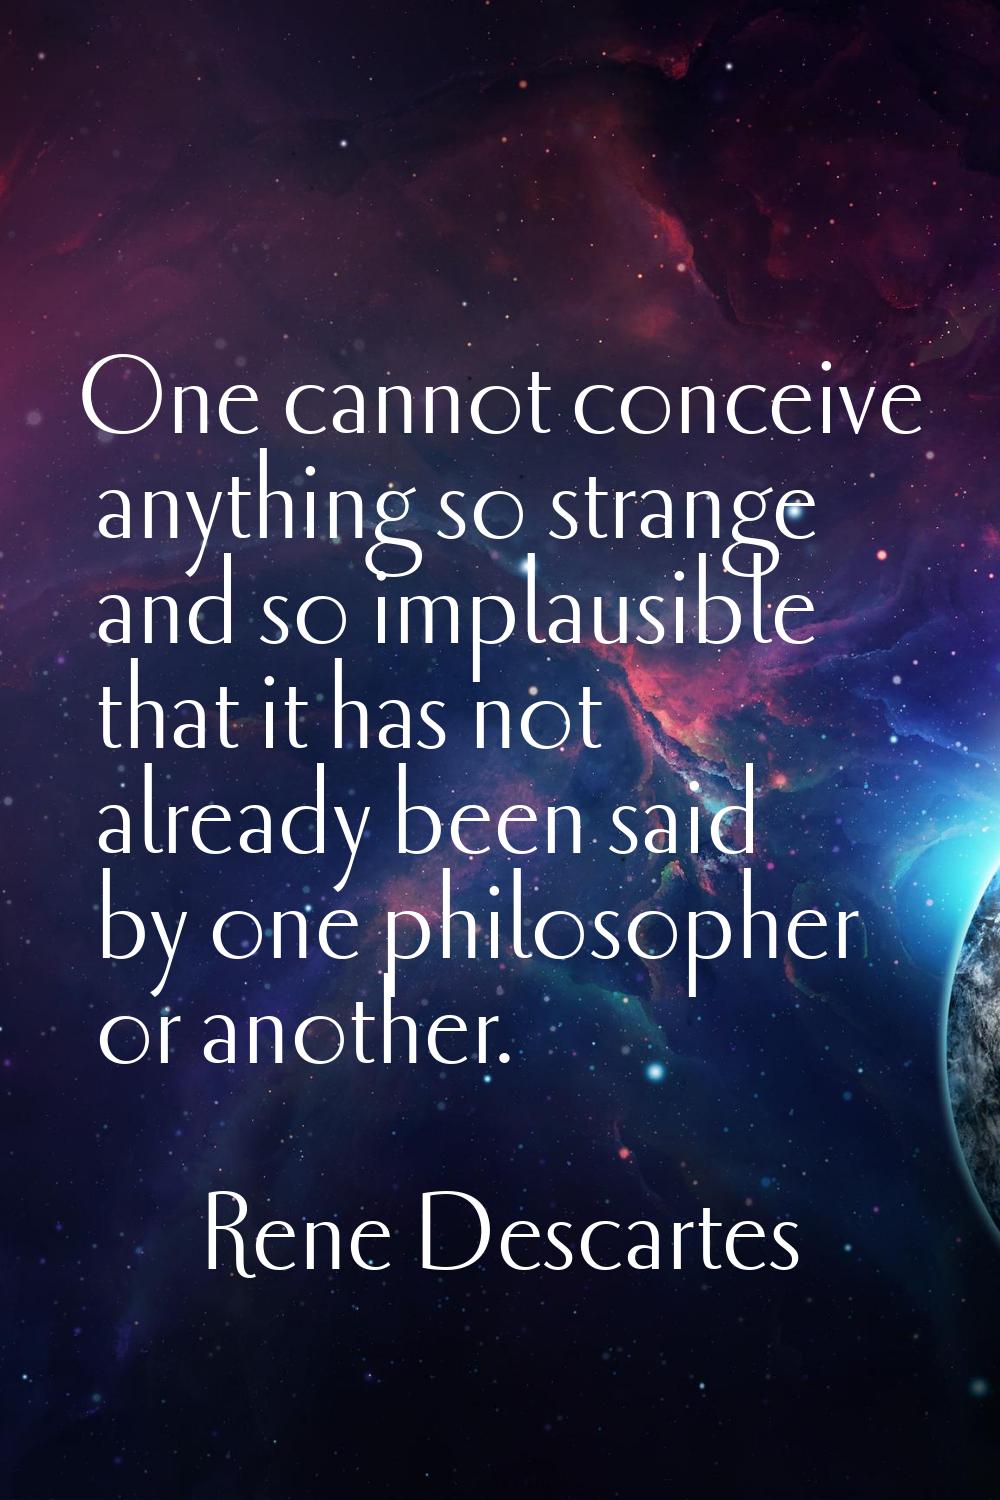 One cannot conceive anything so strange and so implausible that it has not already been said by one